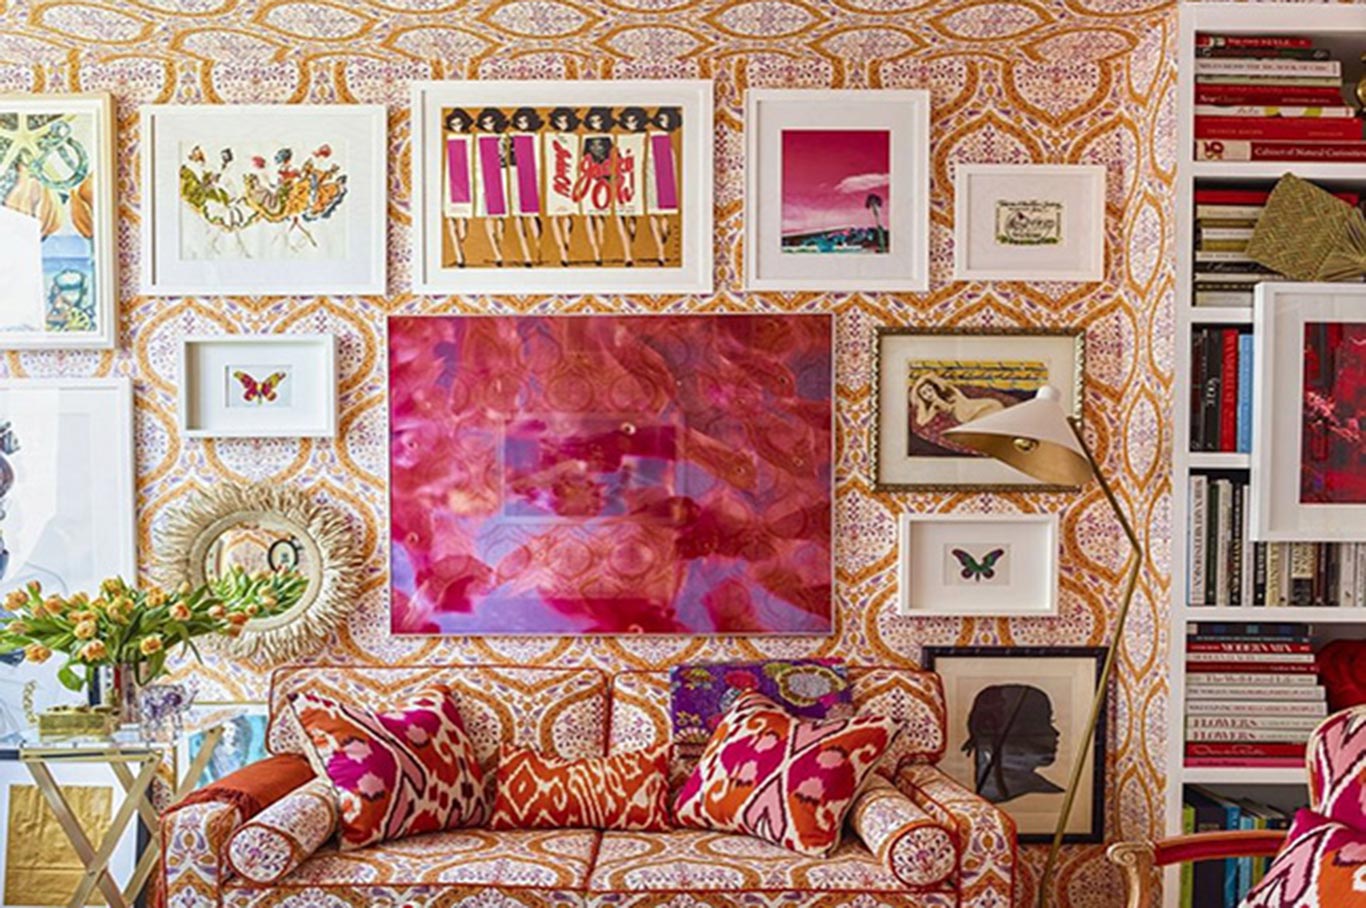 Boho space is accessorized by many patterns and vintage paintings.